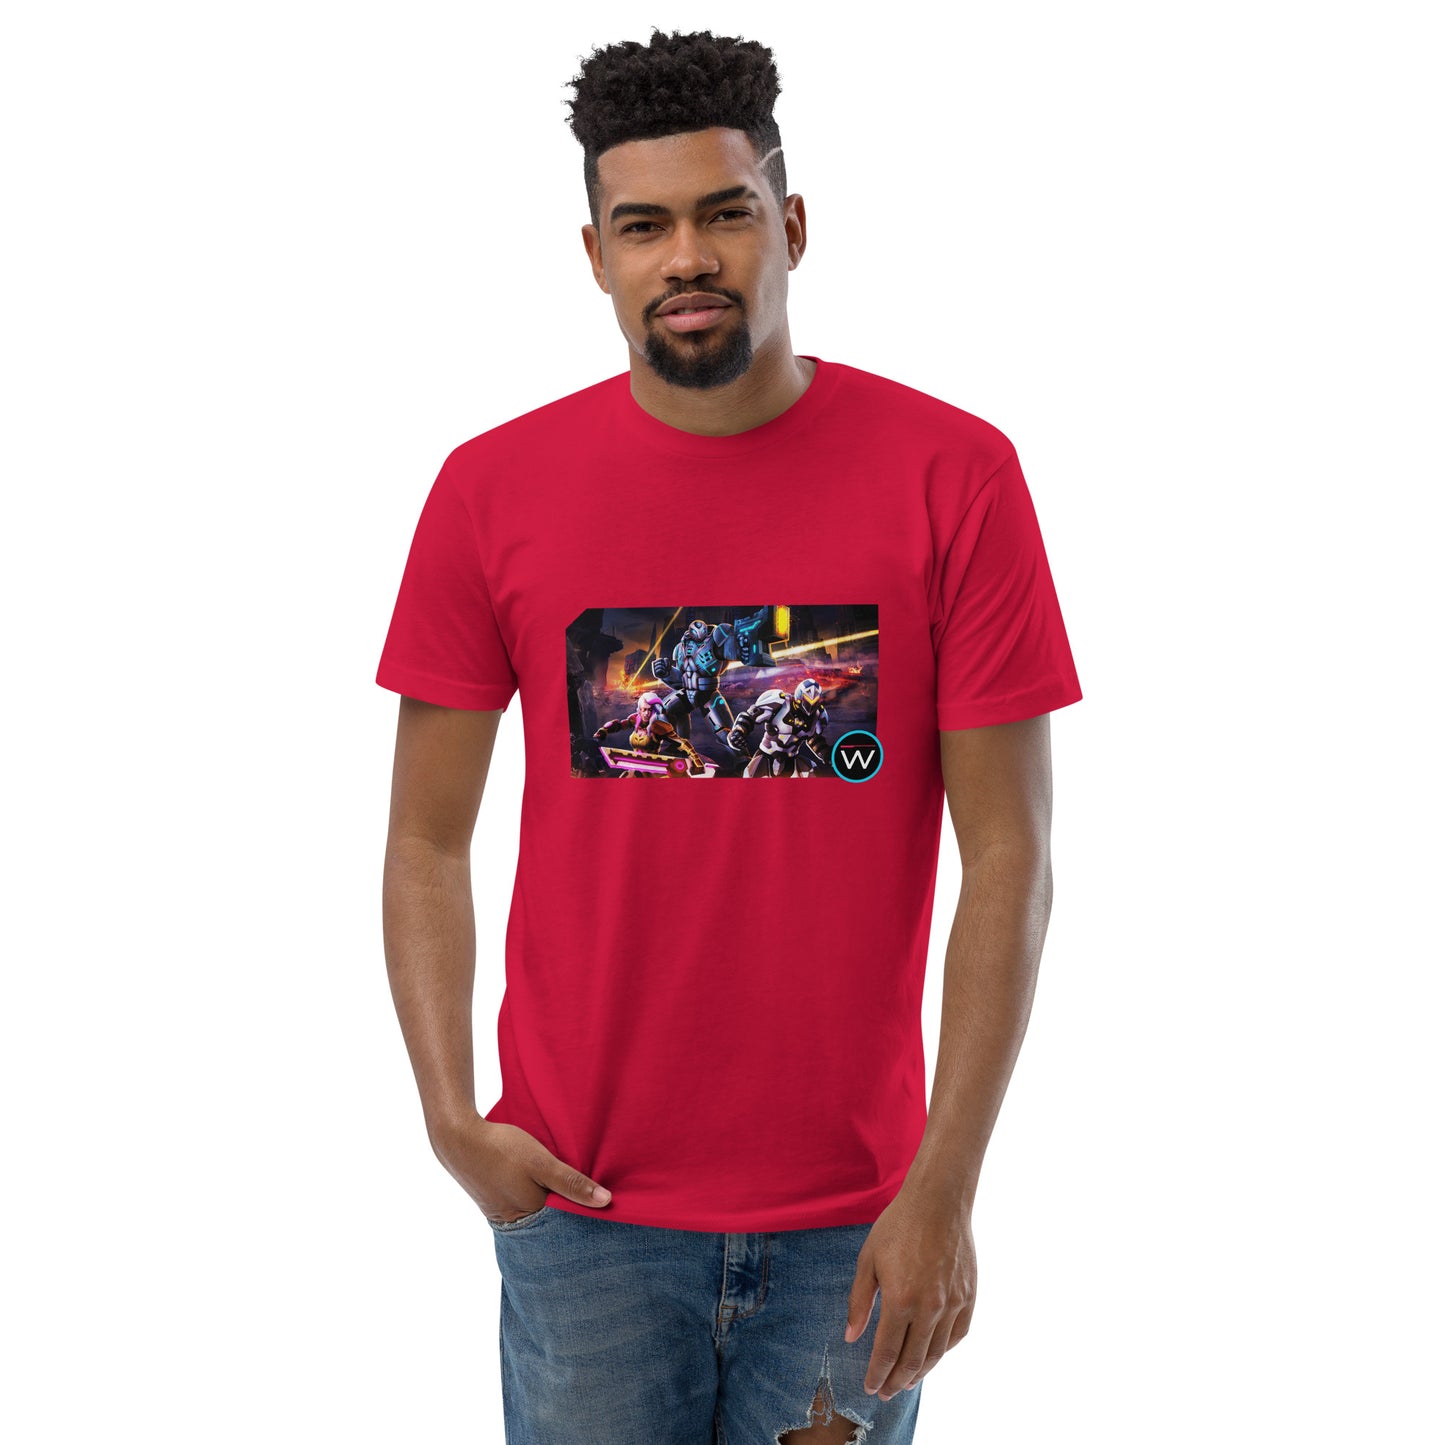 THE HEROS Action Short Sleeve T-shirt